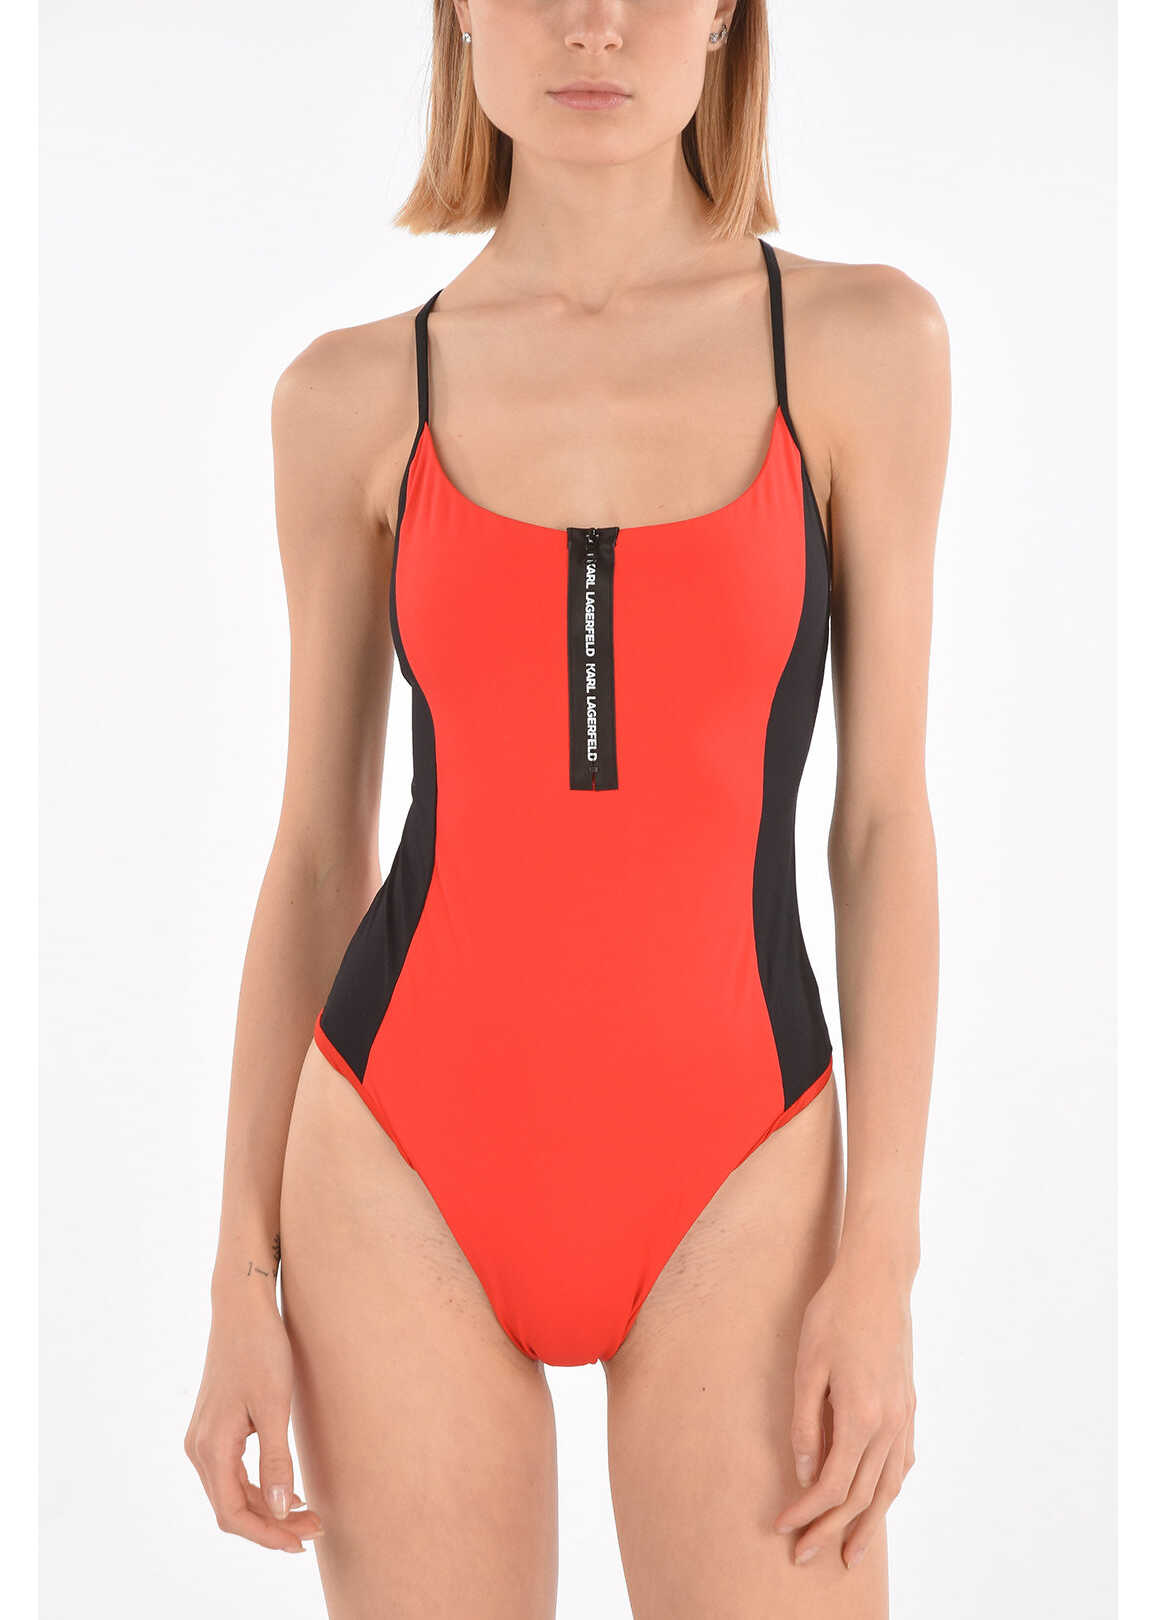 Karl Lagerfeld Zipped Sport Swimsuit Red image0